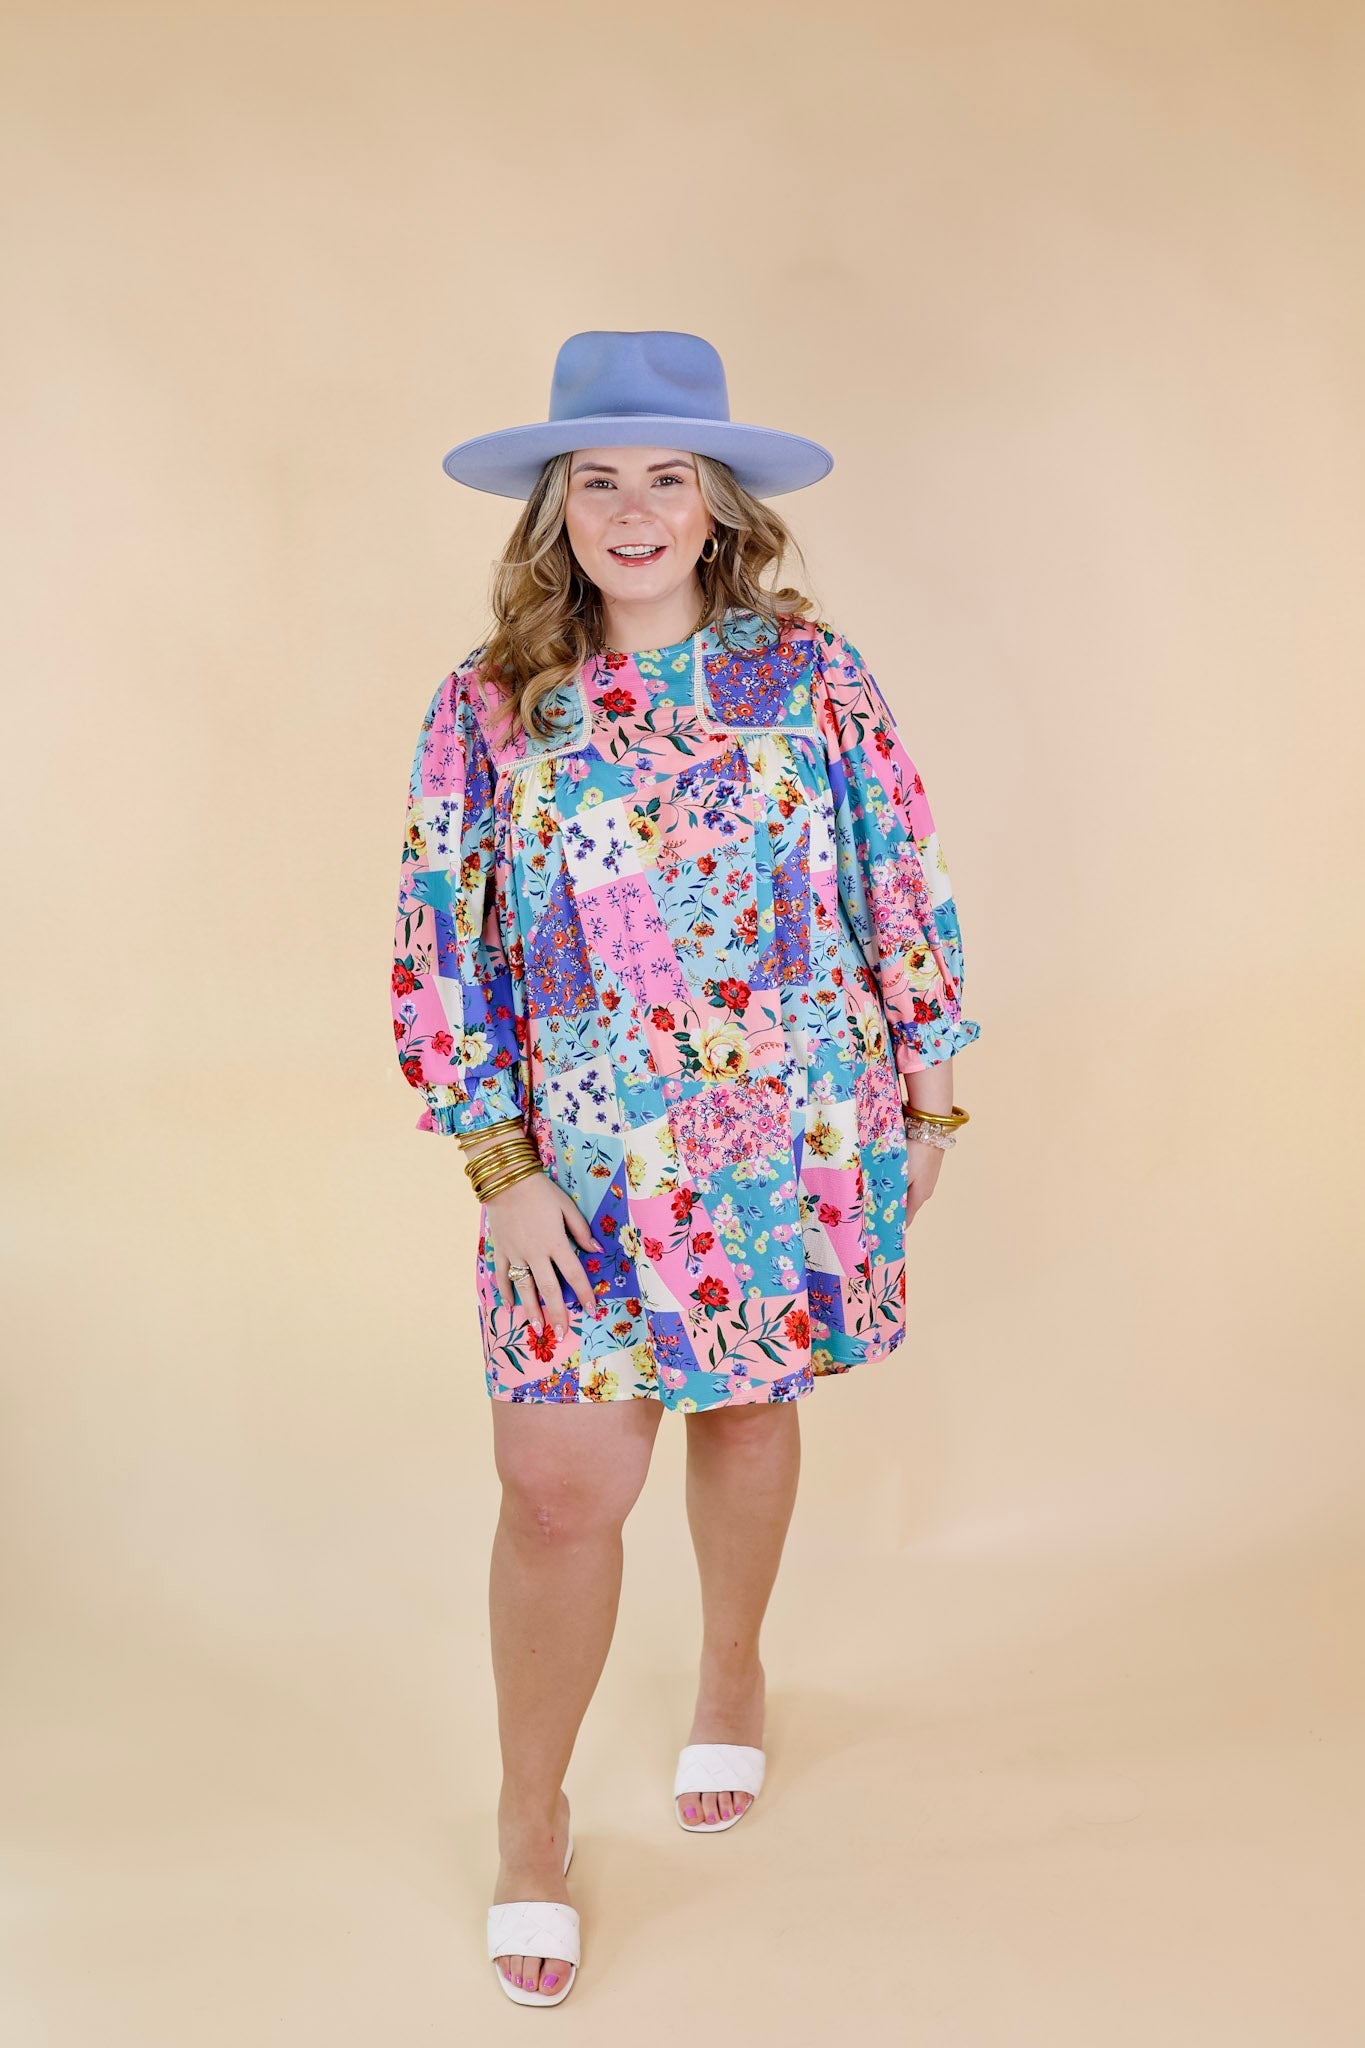 Floral Paradise Floral Patch Pattern Dress in Blue and Pink - Giddy Up Glamour Boutique